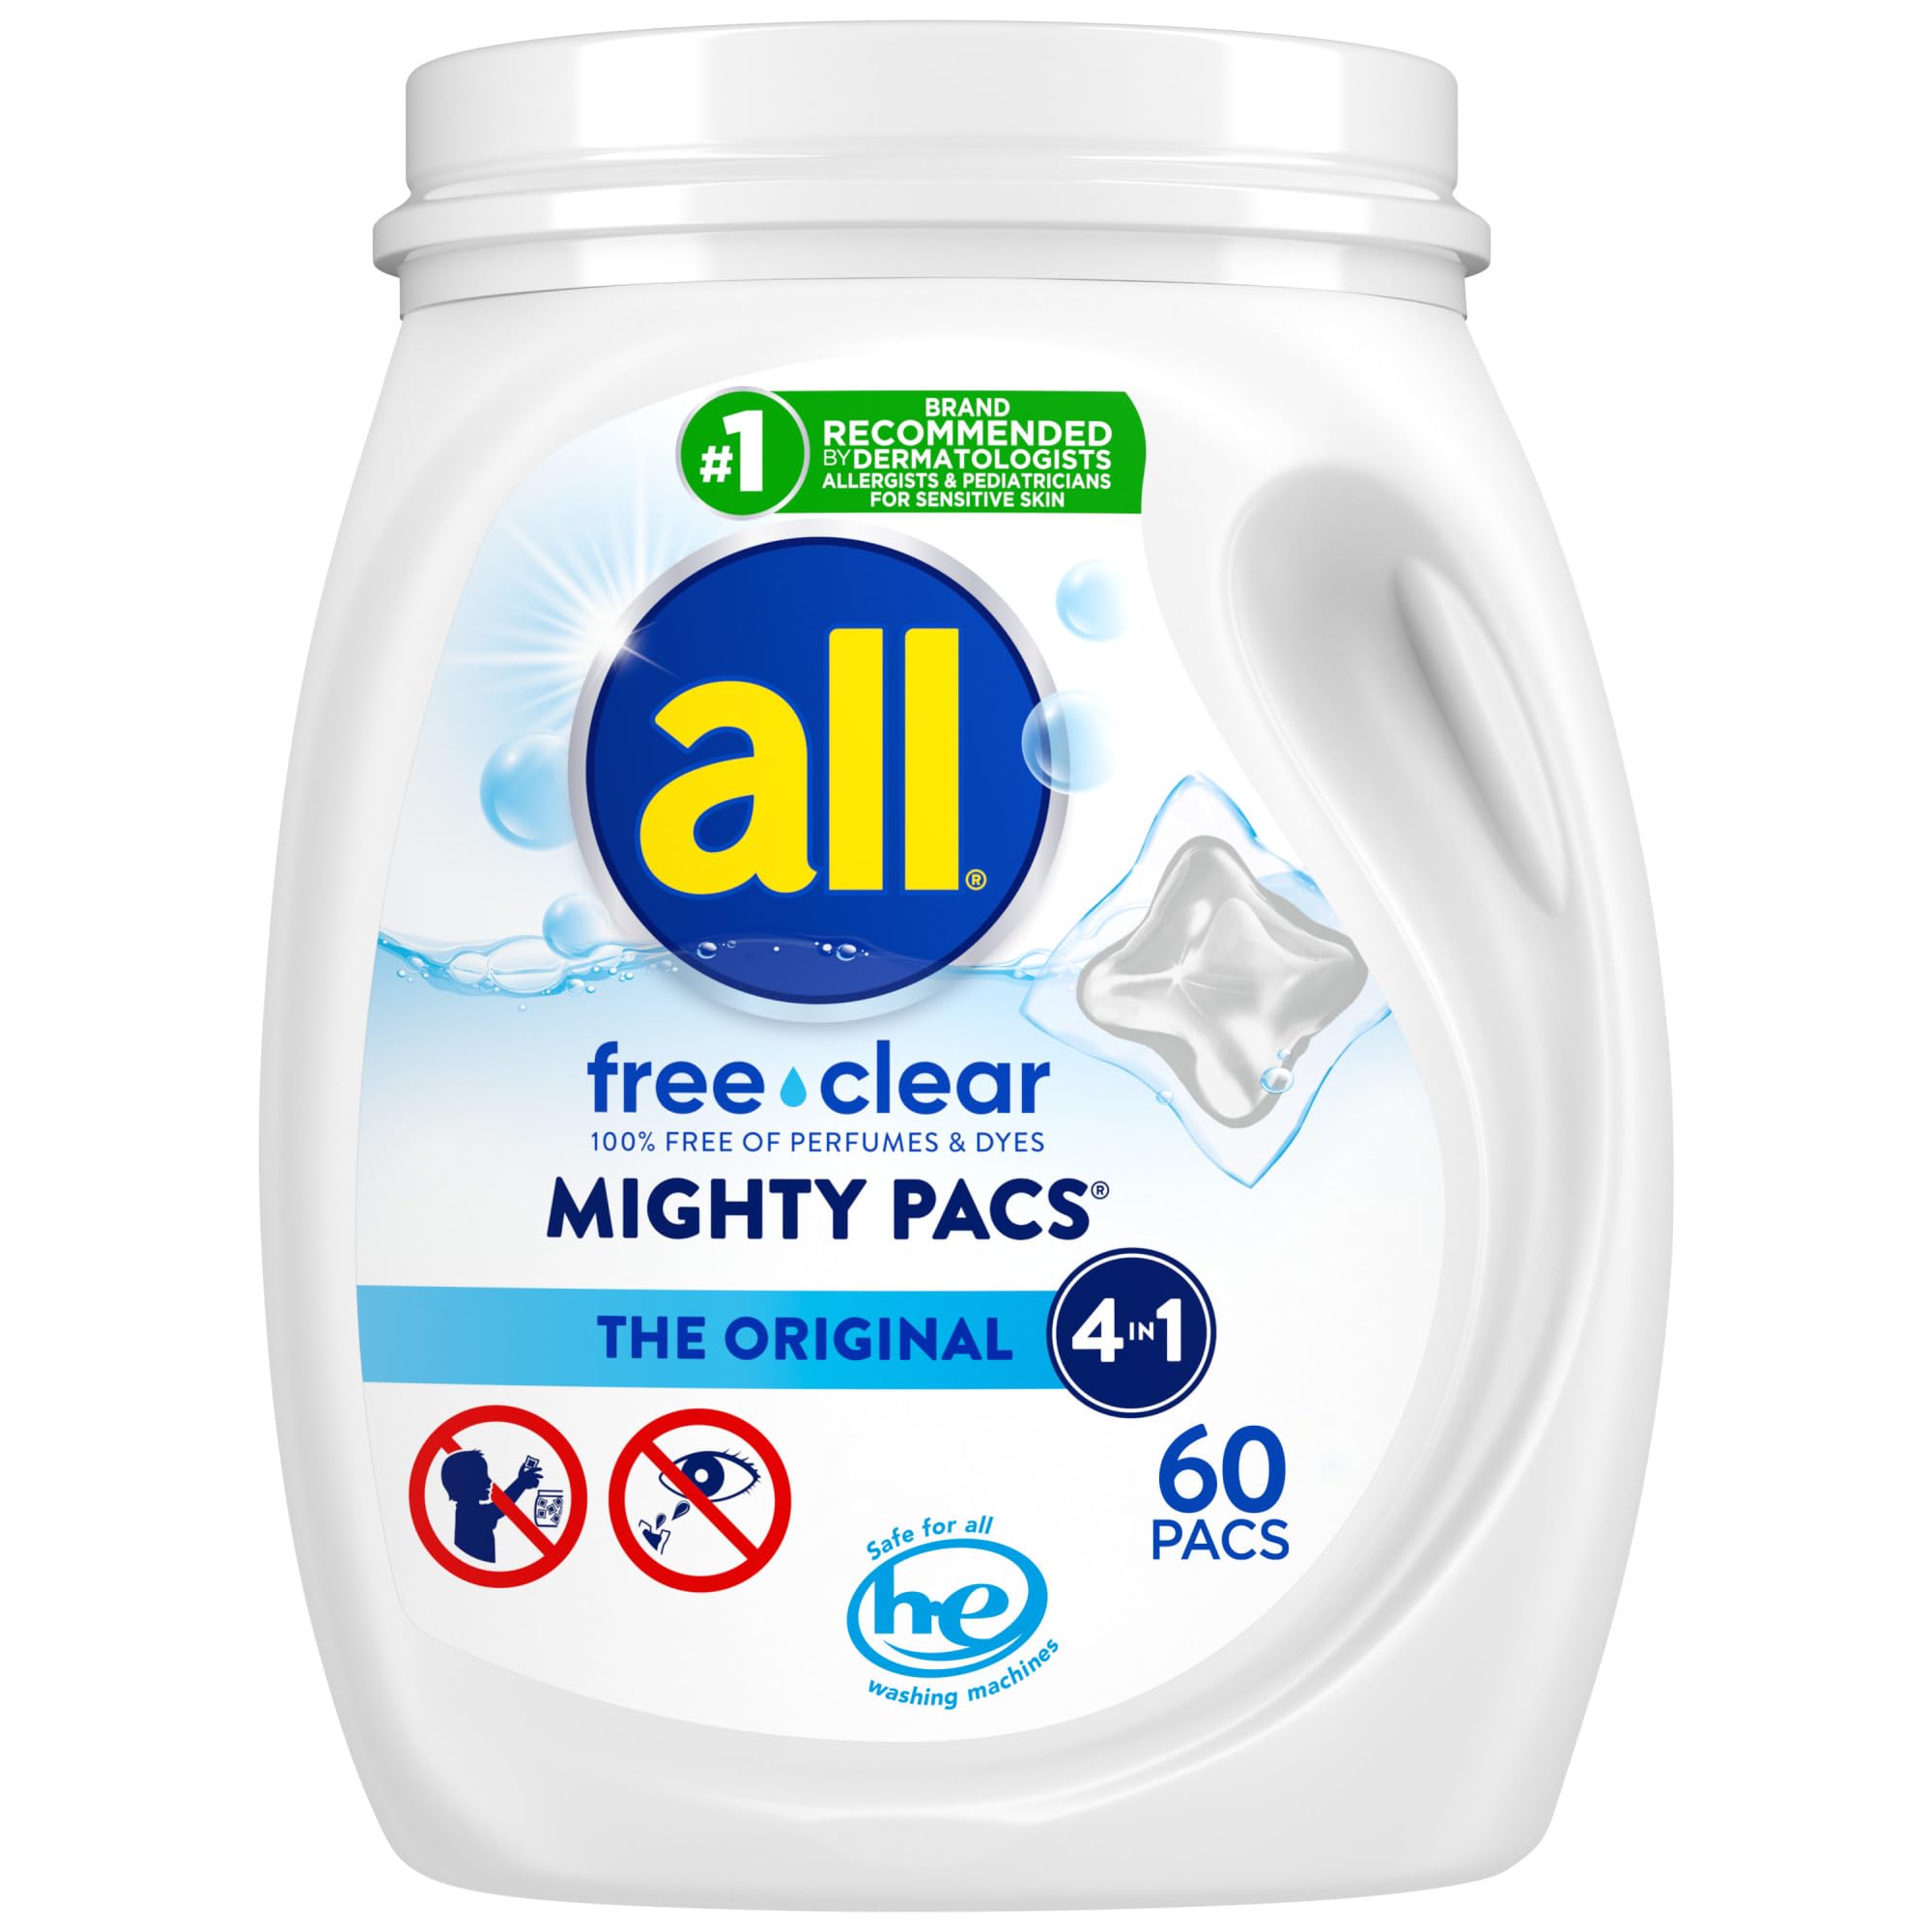 All Mighty Pacs Laundry Detergent Free Clear for Sensitive Skin Tub 60 Count [Subscribe & Save] $11.88